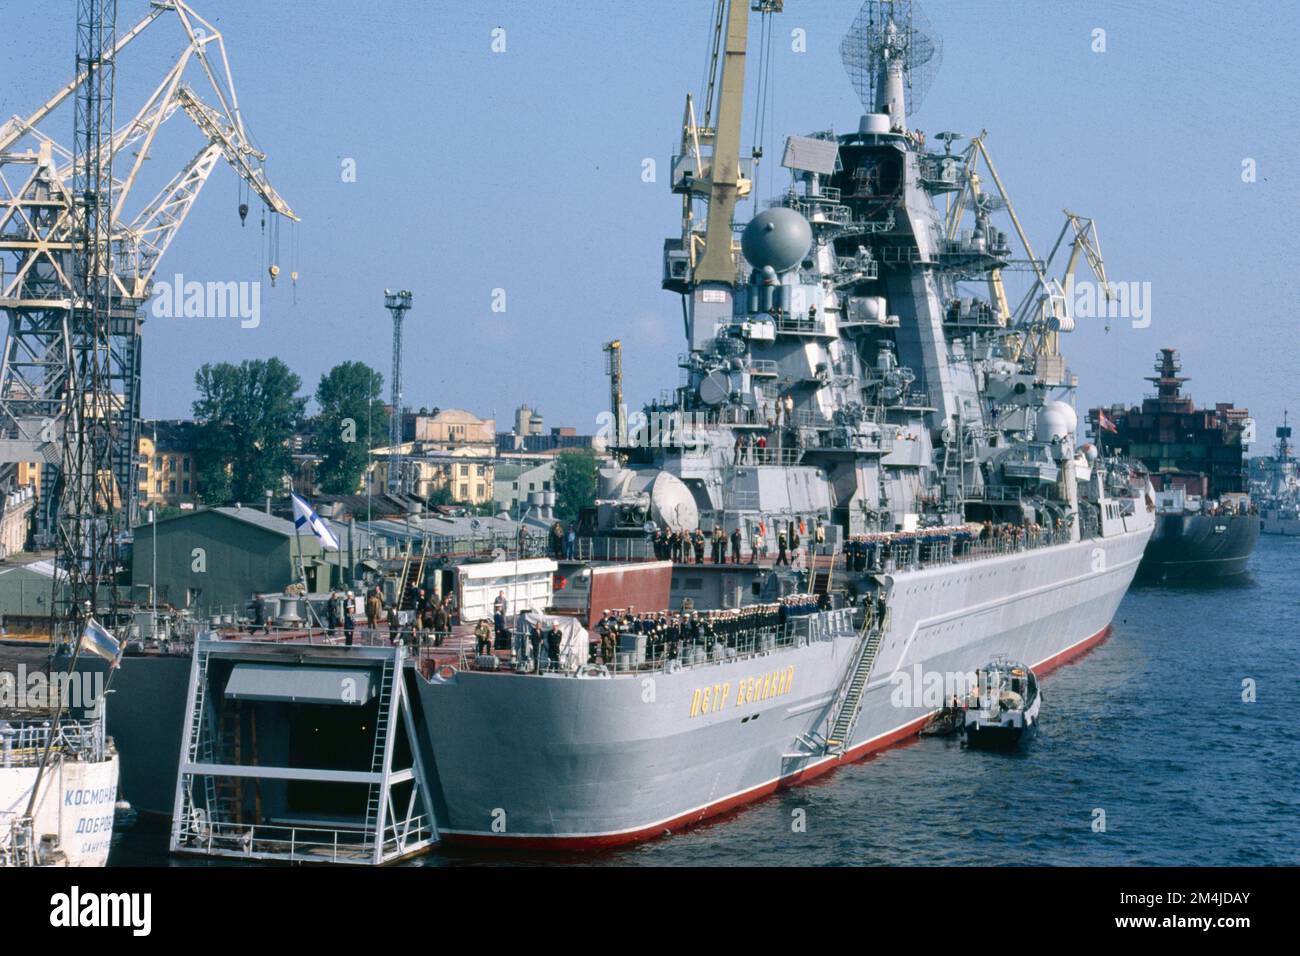 Russian battlecruiser Pyotr Velikiy,  Russian for Peter the Great, Pyotr Velikiy (Russian: Пётр Великий) is the fourth Kirov-class battlecruiser of the Russian Navy. It was initially named Yuri Andropov (Russian: Юрий Андропов) after the former General Secretary of the Communist Party, but the ship's name was changed after the fall of the Soviet Union. The Russian designation for the type is 'heavy nuclear missile cruiser', but Western defense commentators have resurrected the term 'battlecruiser' to describe them, as they are the largest surface 'line of battle' warships in the world. Stock Photo